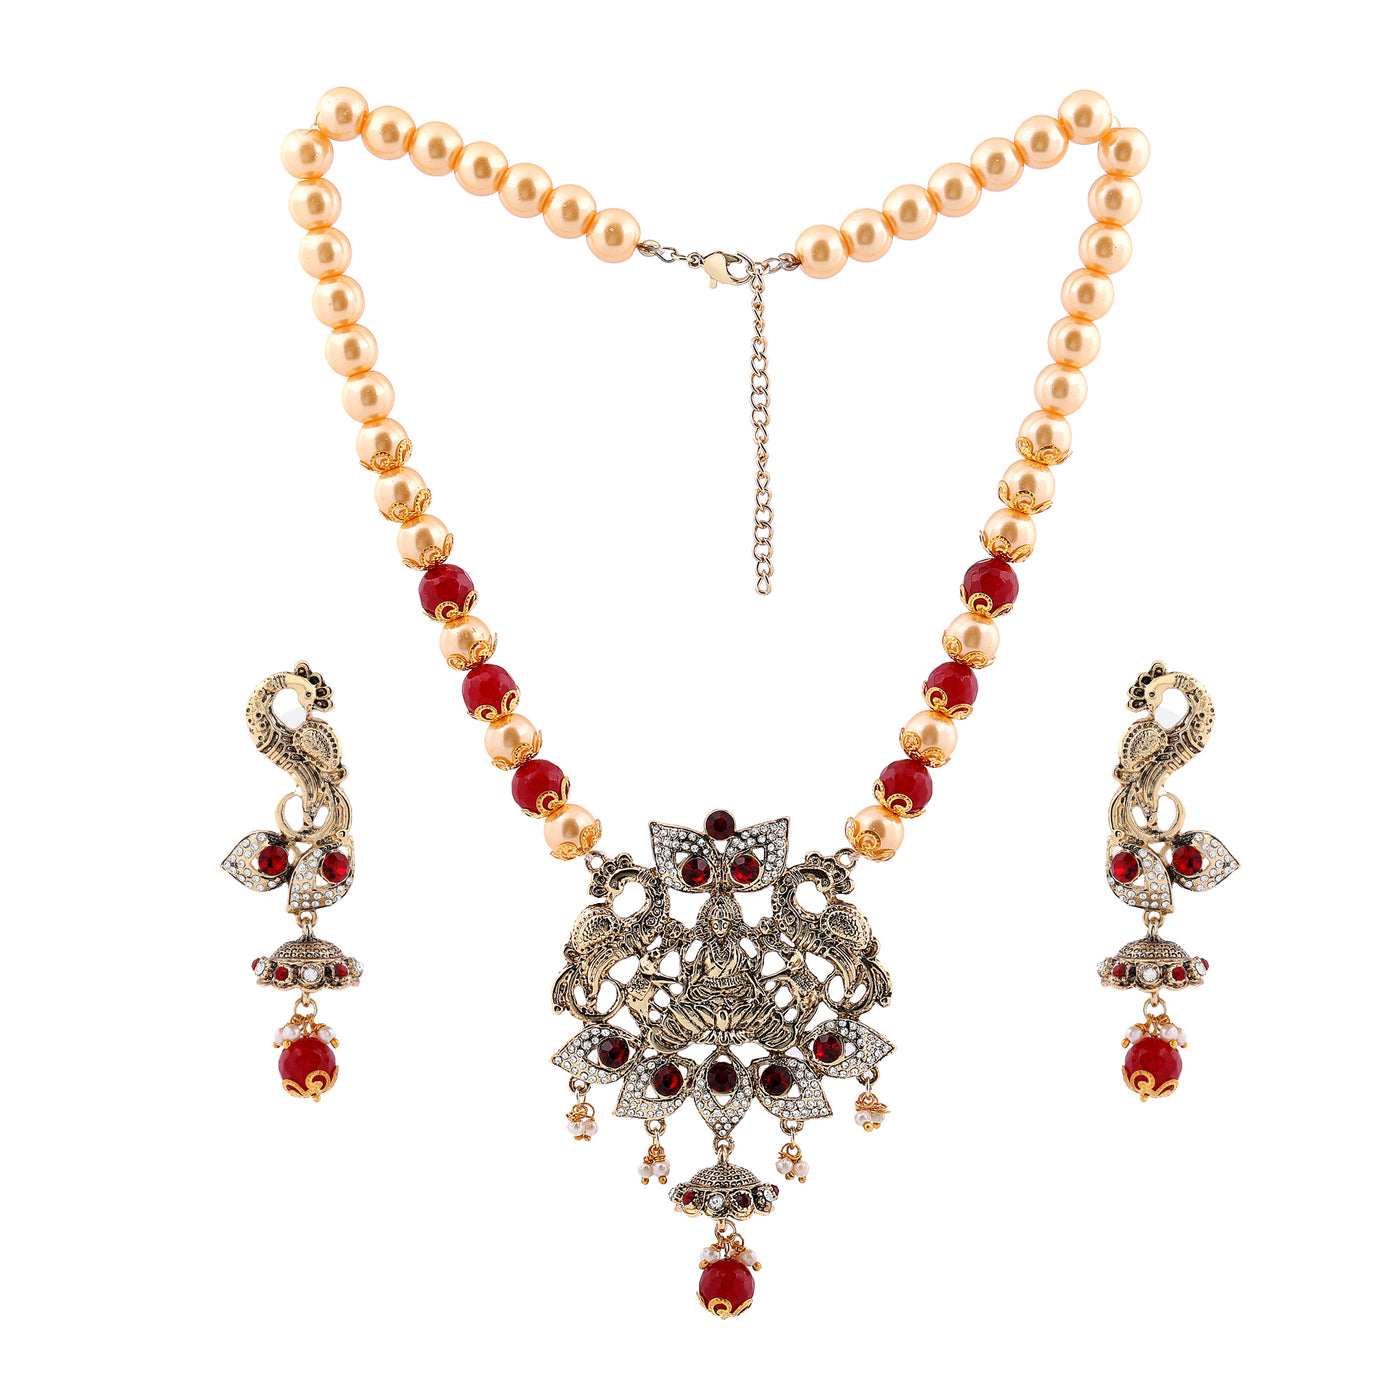 Estele Gold Plated Antique Laxmi Devi & Peacock Textured Pearl Necklace Set with Austrian Crystals,Ruby stones & Ruby Beads for Women